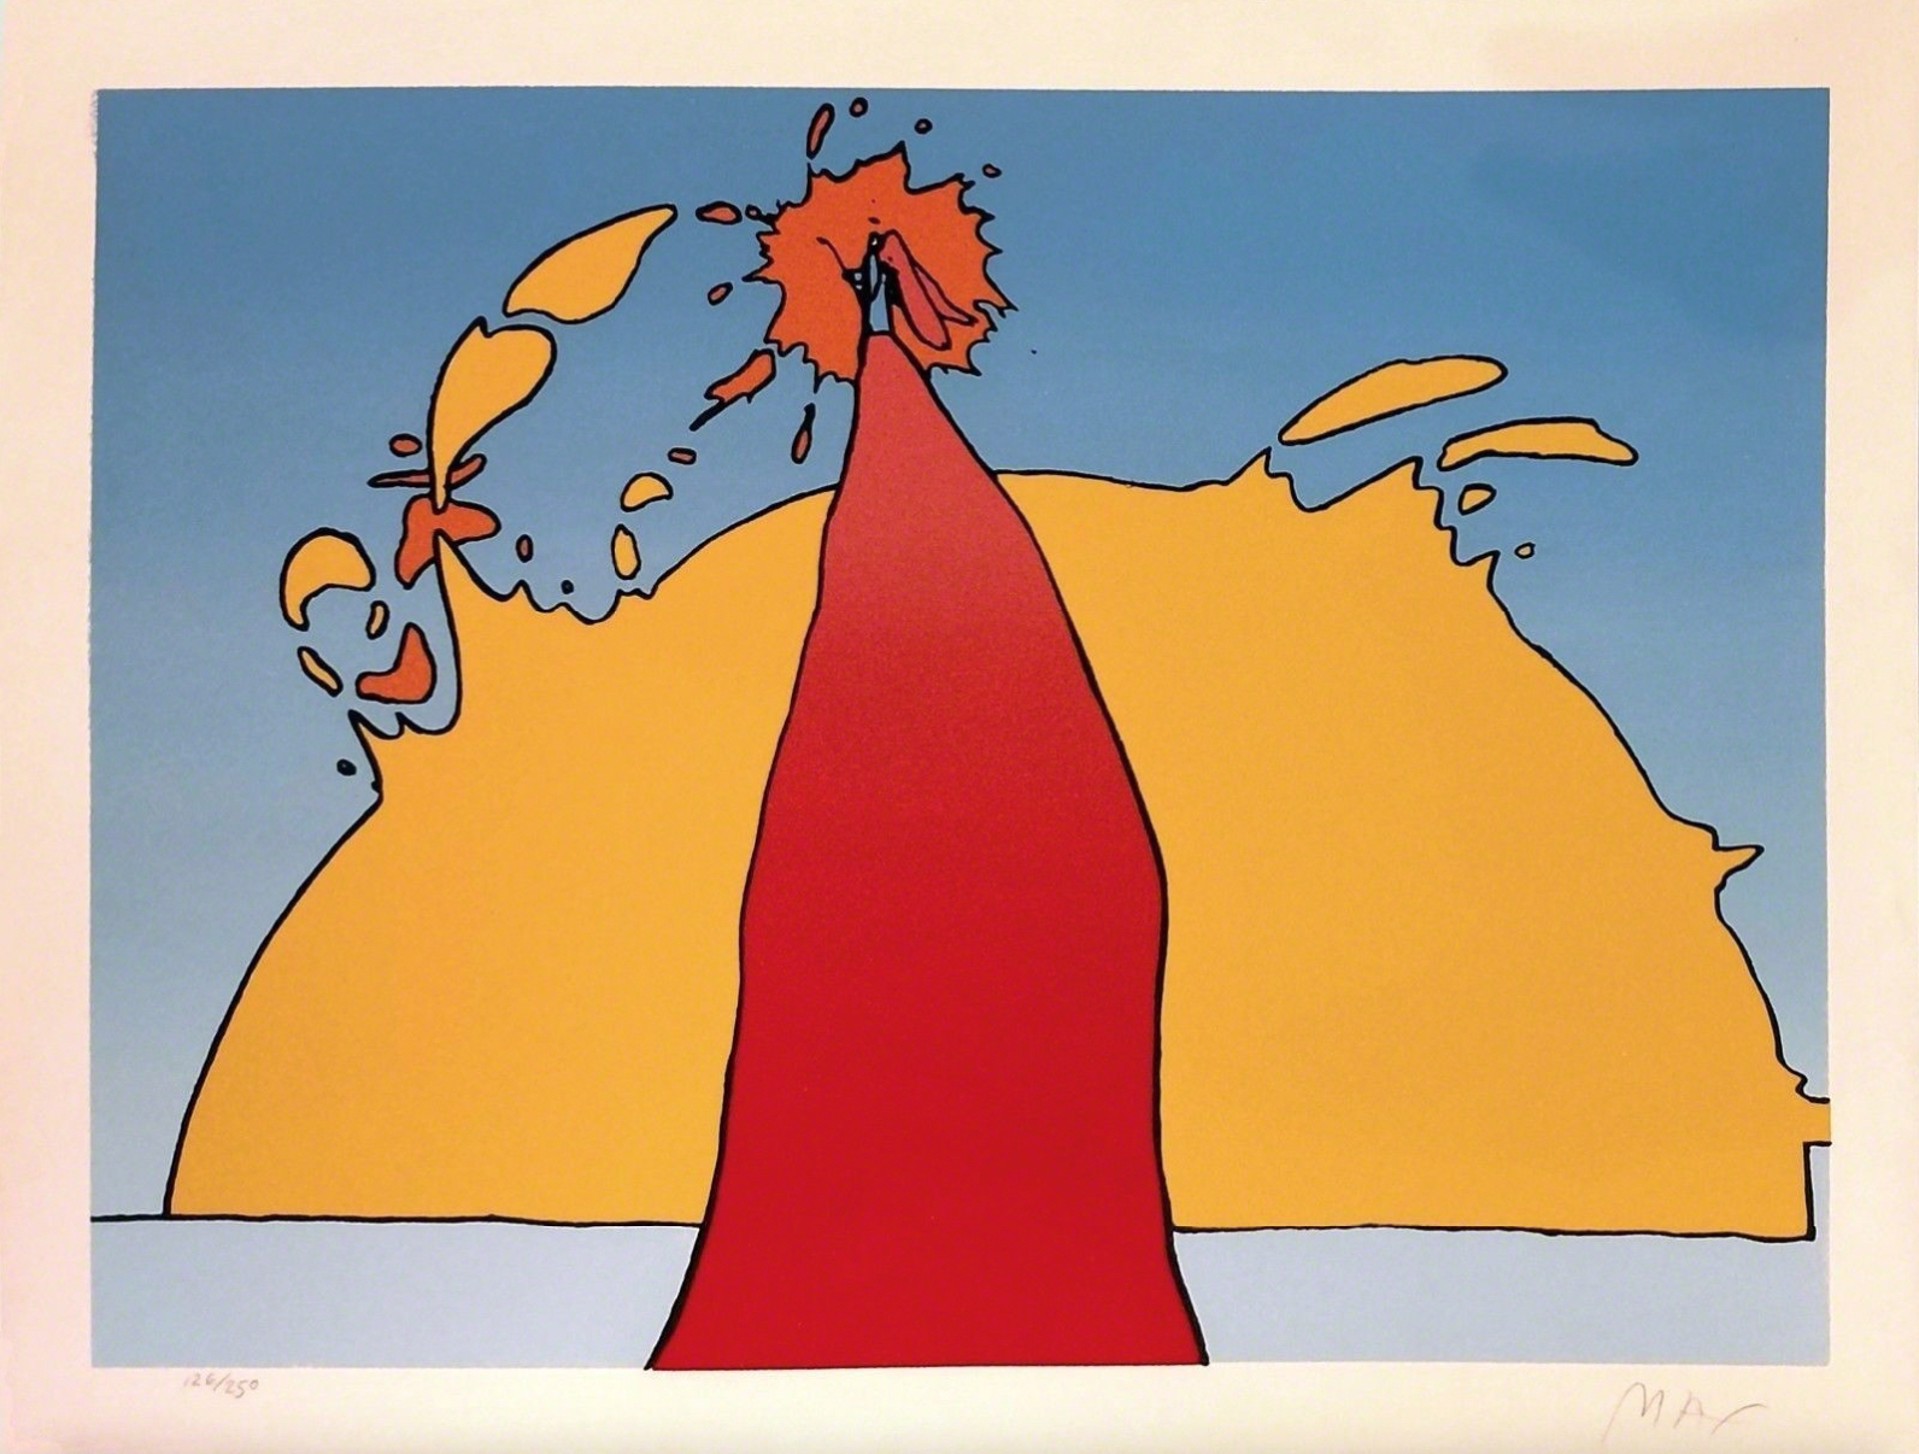 His Own Eclipse by Peter Max